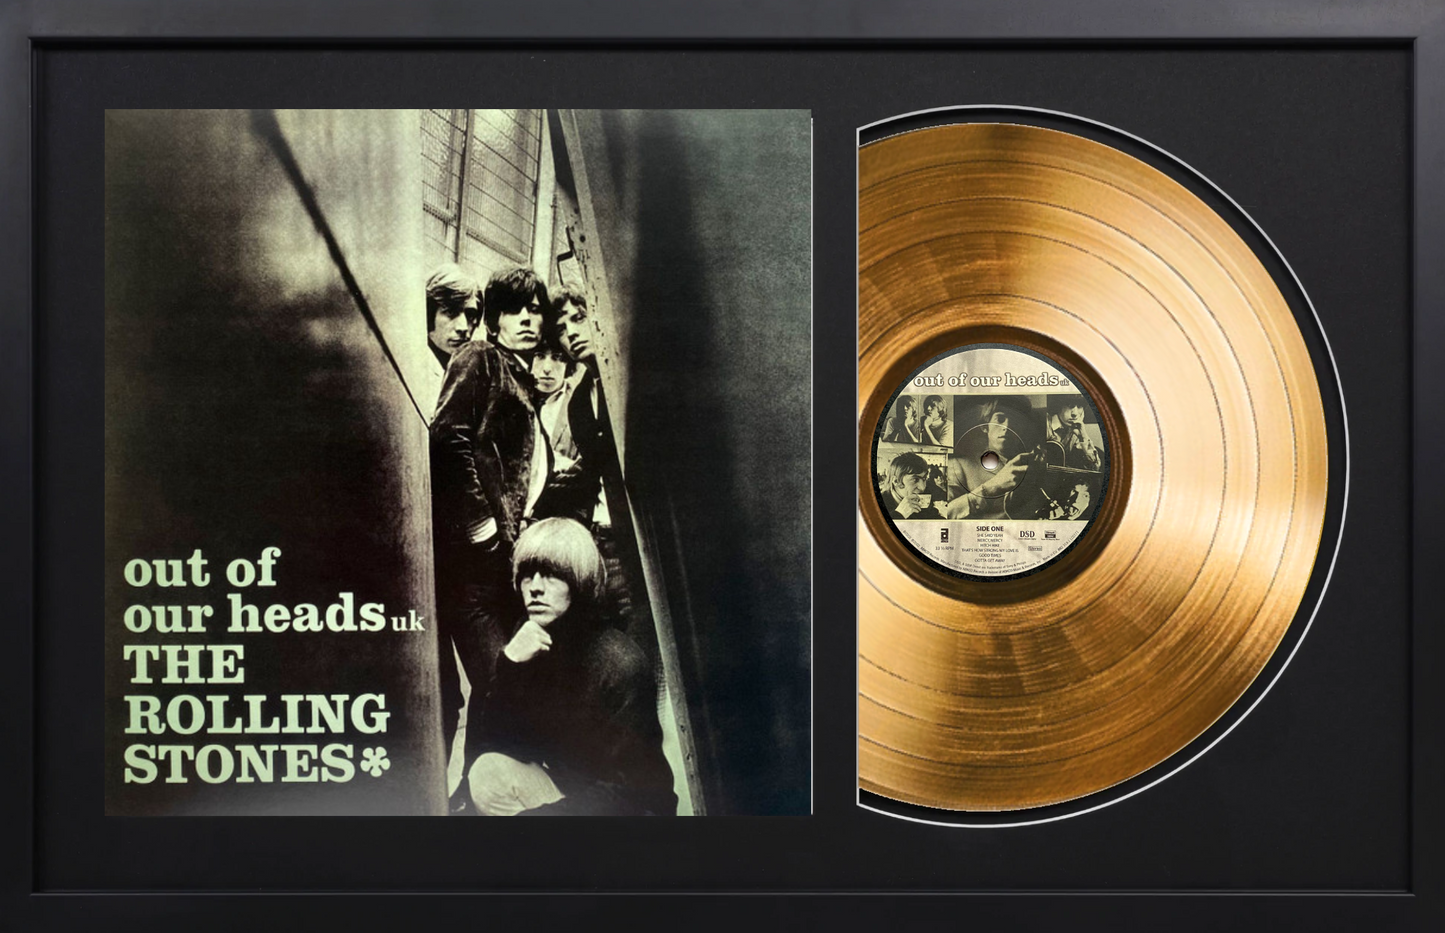 The Rolling Stones - Out of Our Heads - 14K Gold Framed Album